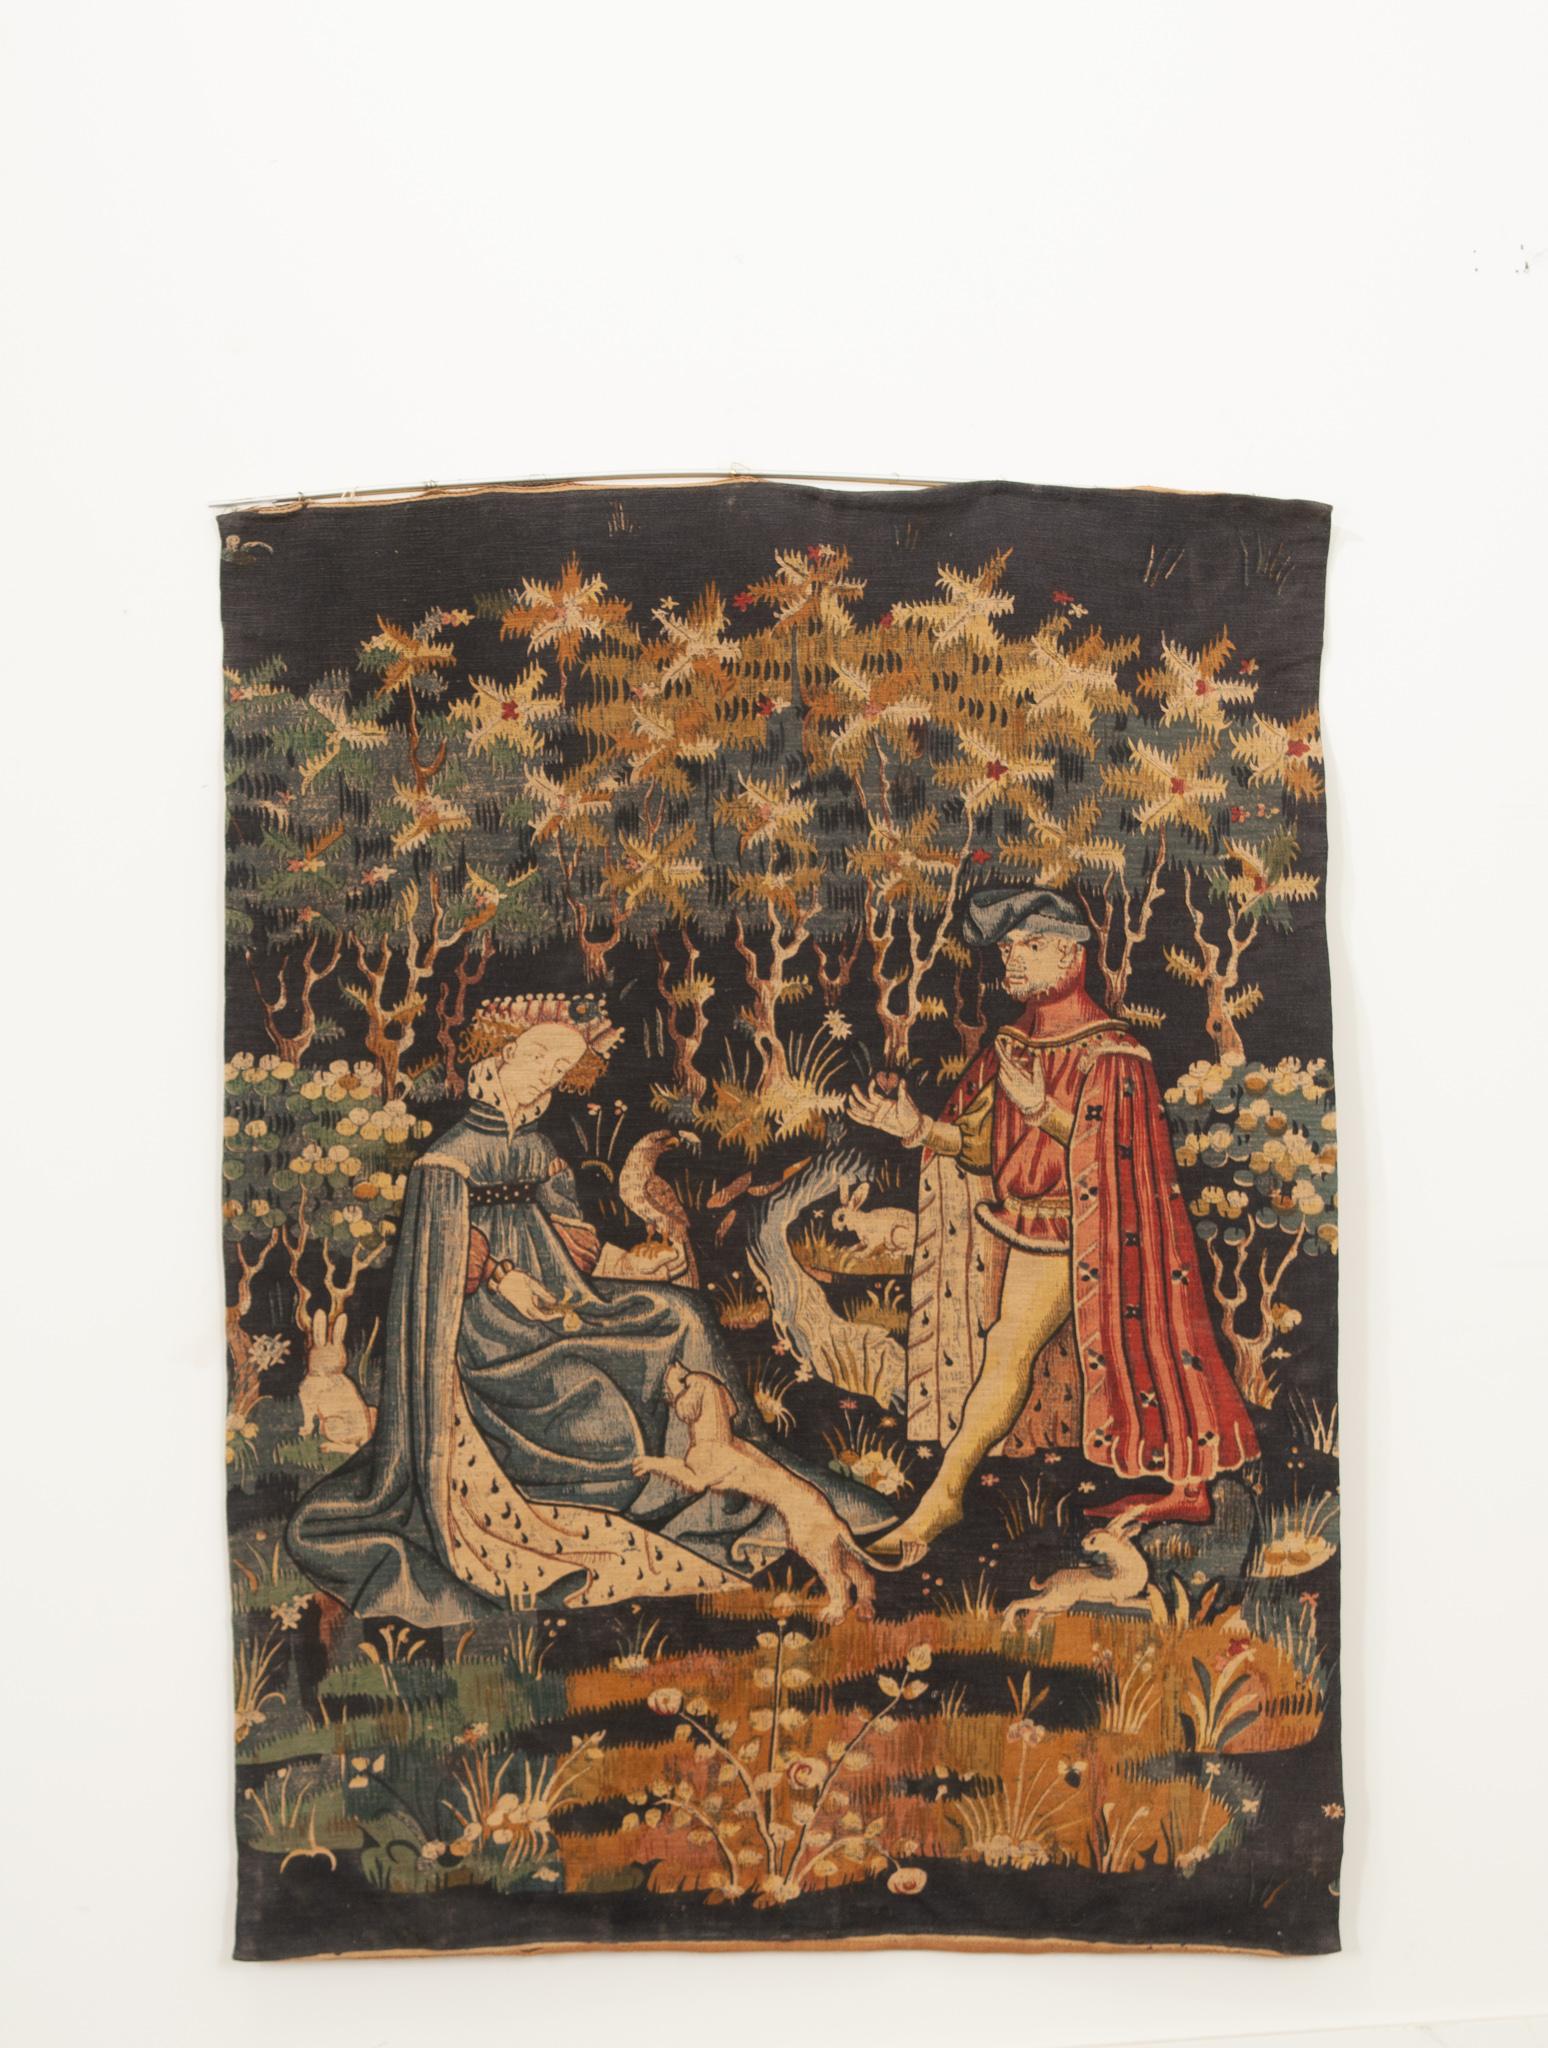 This wonderful French tapestry from the 20th century is a reproduction of one of the most recognizable tapestries of the Middle Ages. The original, named “An Offering of the Heart”, was crafted in the 15th century by an unknown Flemish artist and is